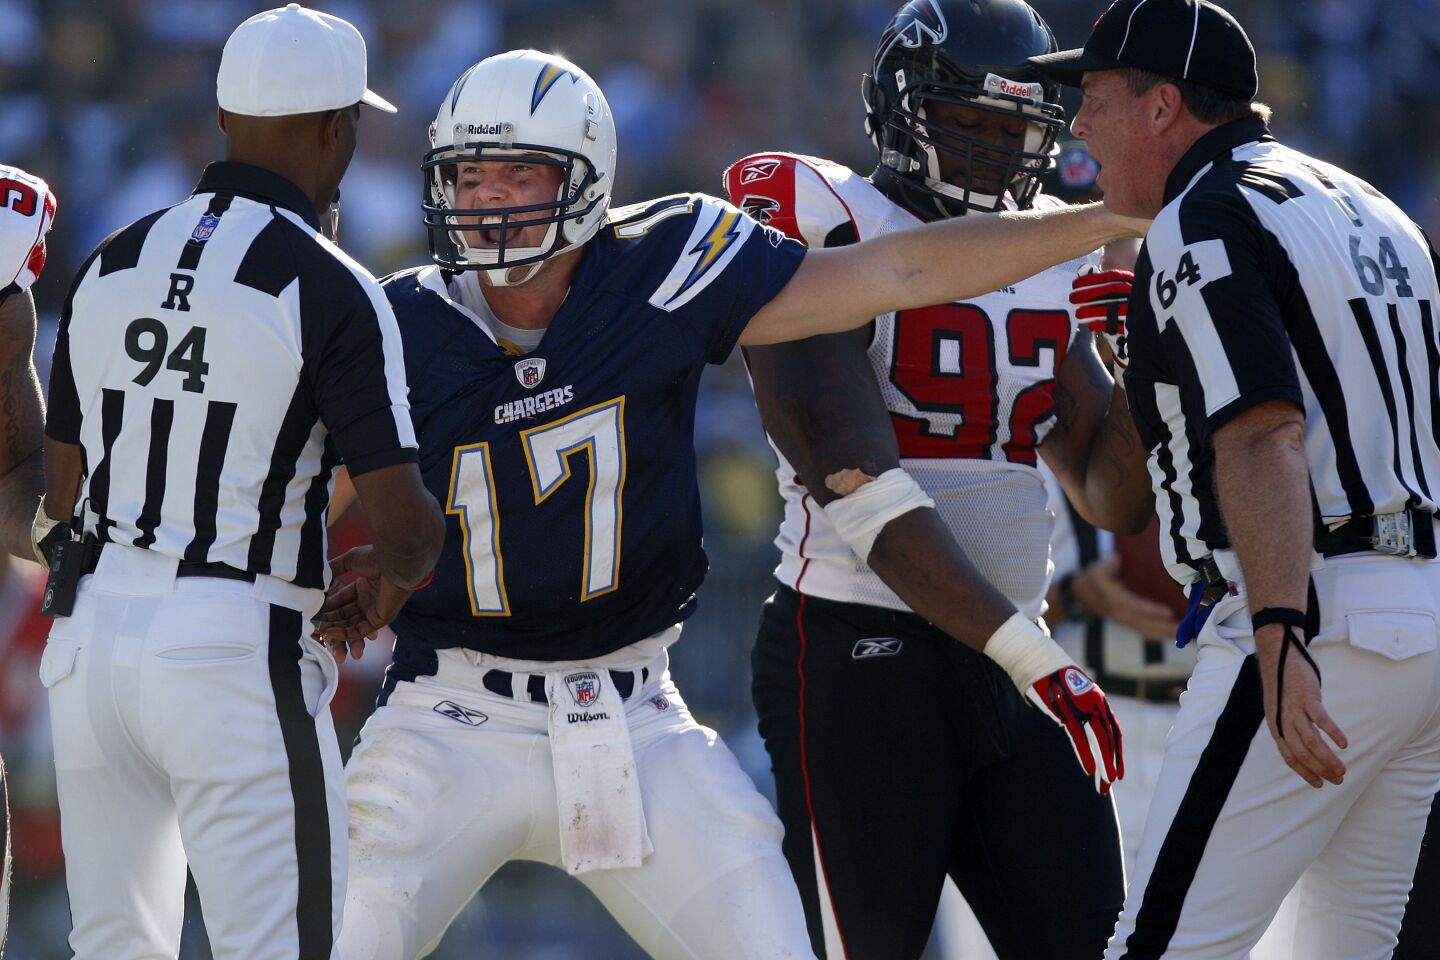 Chargers vs. Falcons 11/30/08